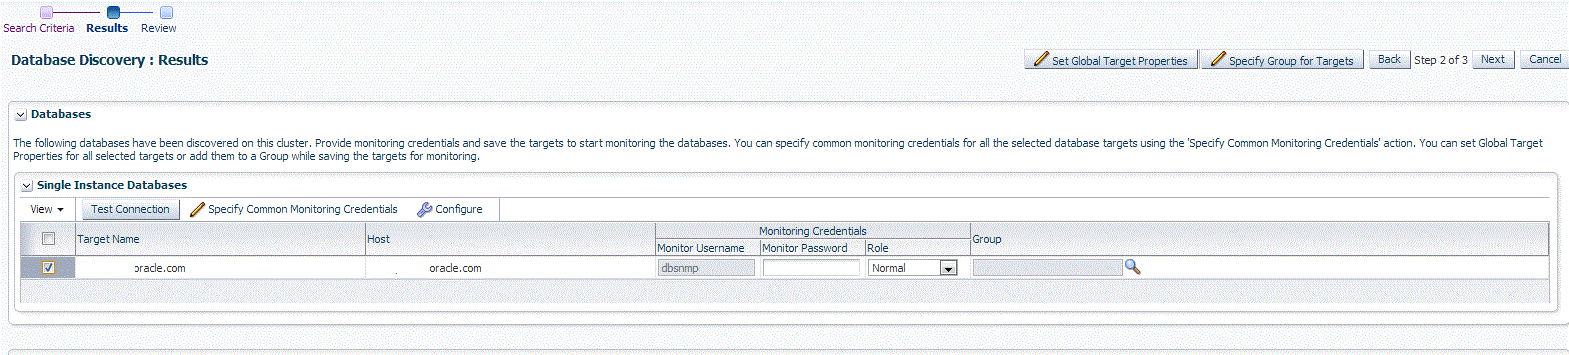 Database Discovery Results instance page